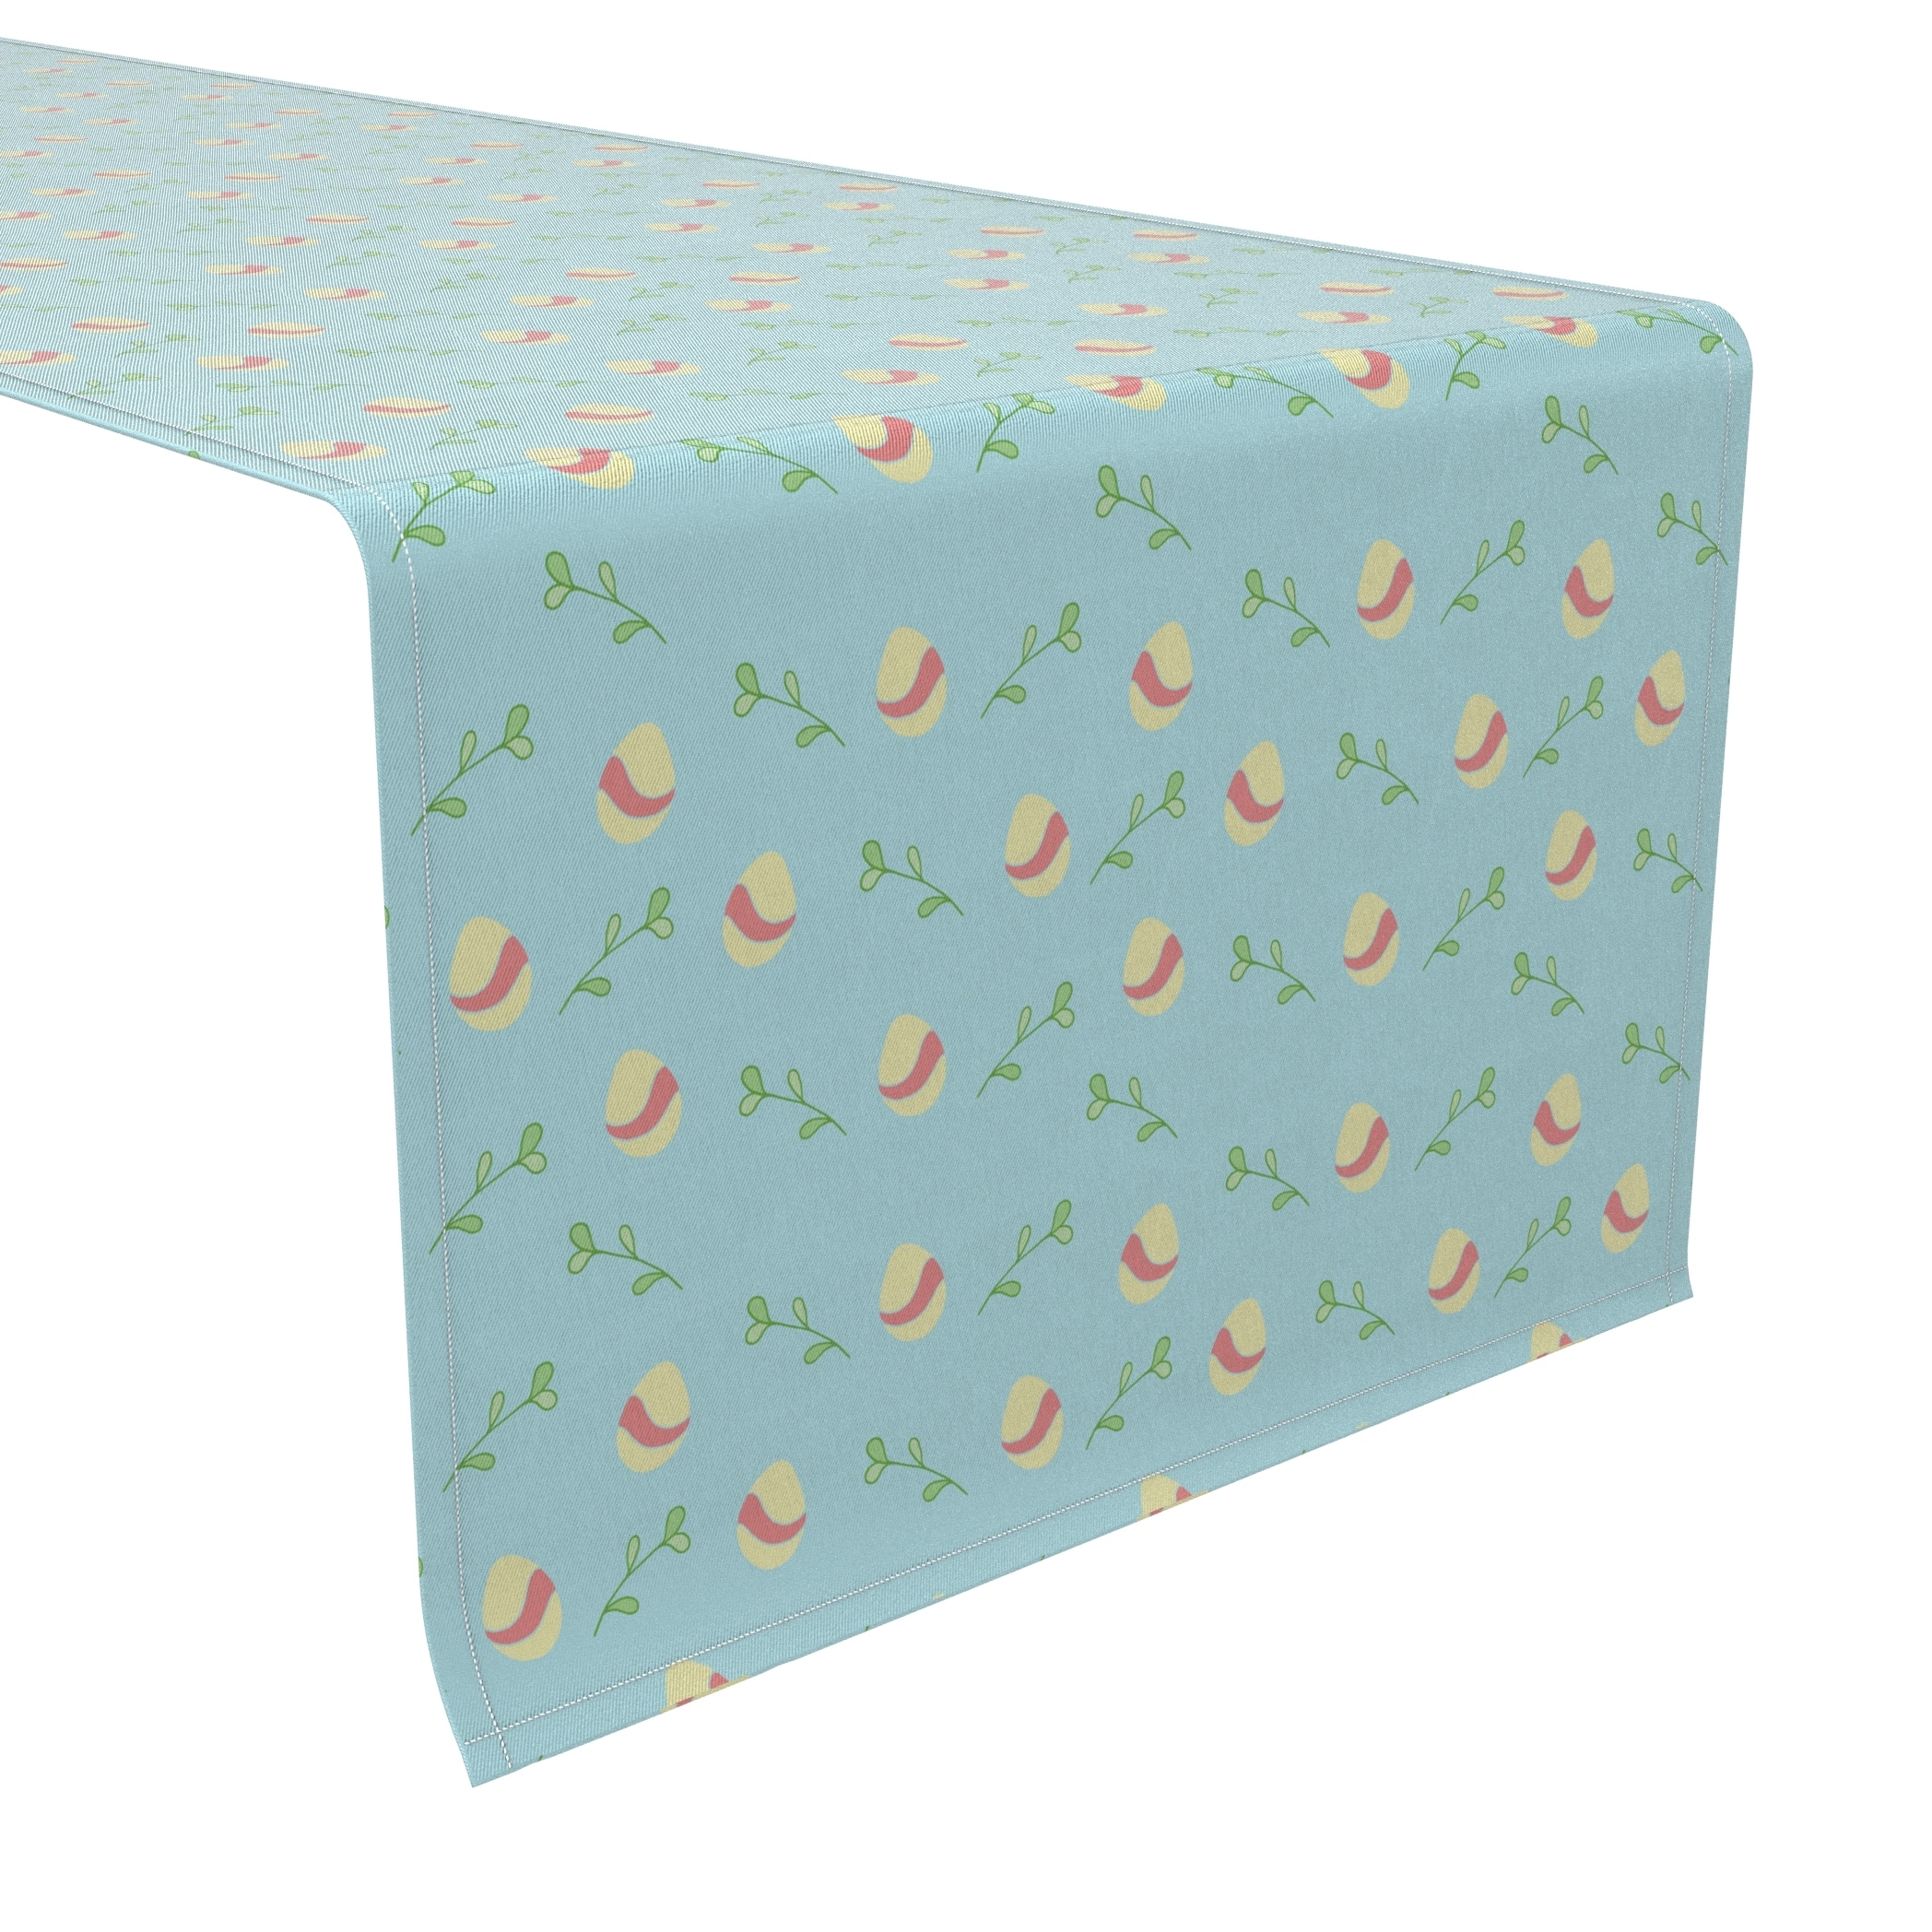 Fabric Textile Products, Inc. Table Runner, 100% Cotton, 16x108", Simple Easter Decoration